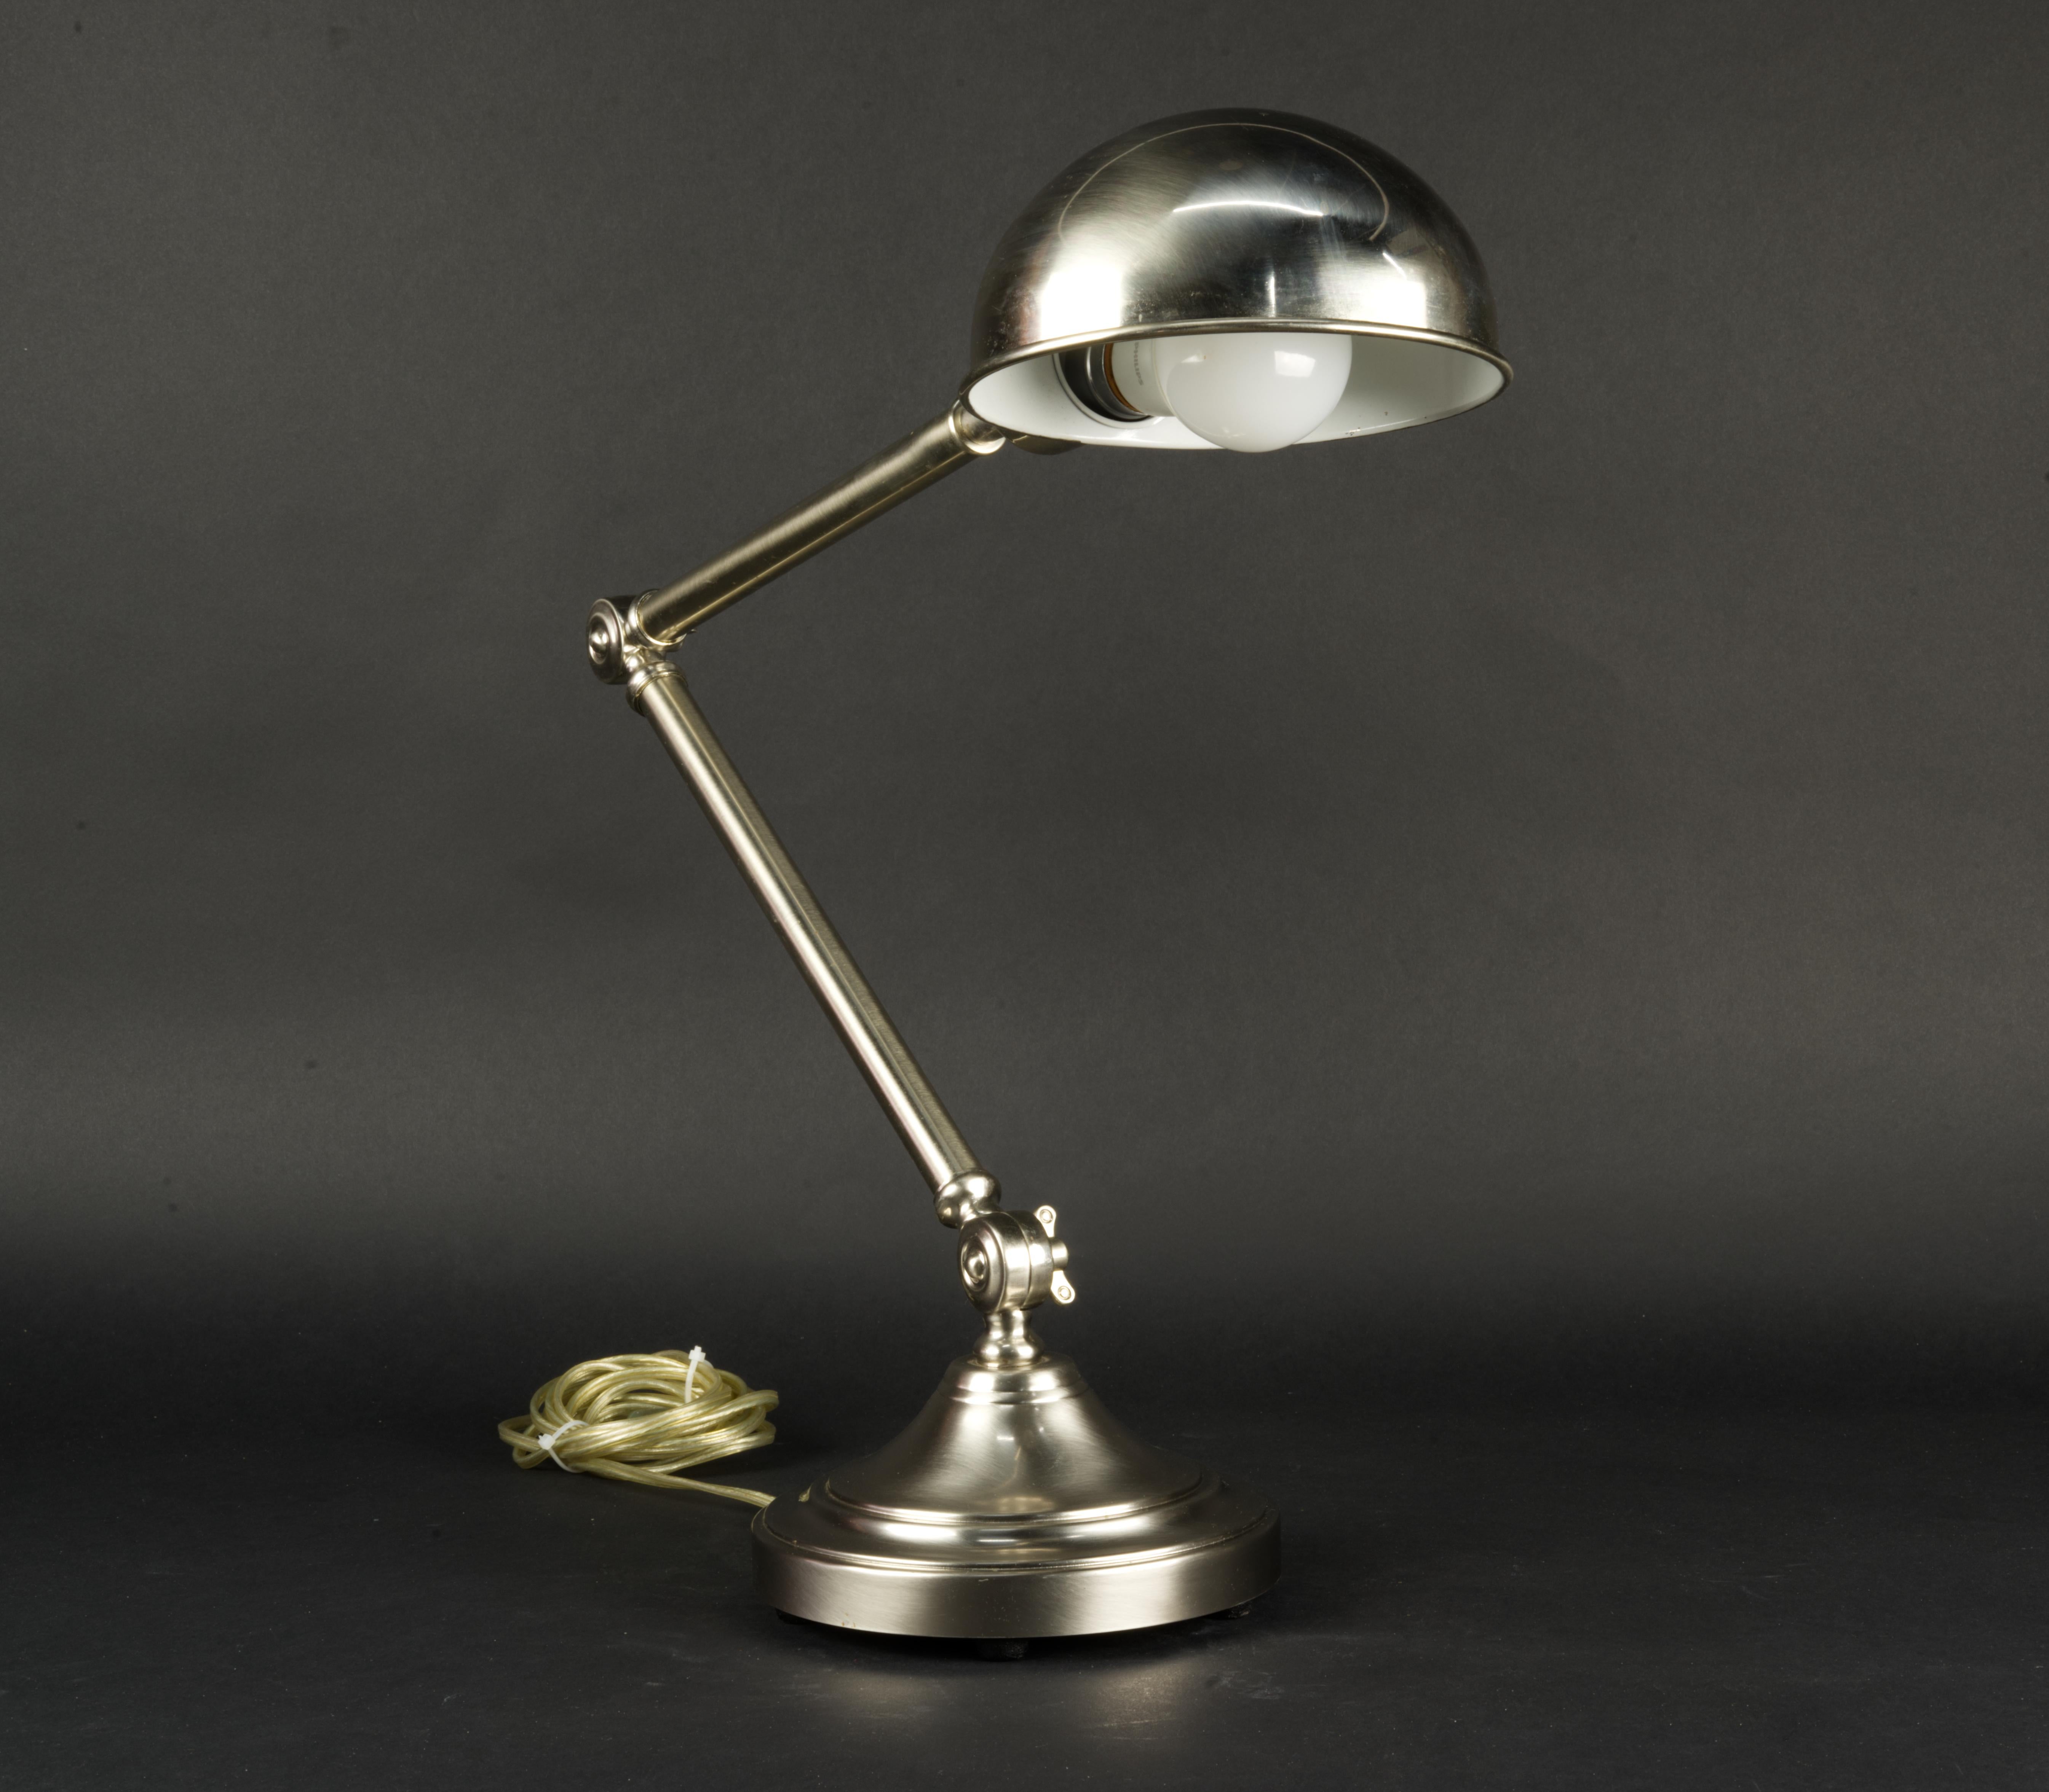 Brushed  Kinetic Table Lamp by Robert Abbey in brushed chrome model #1500 For Sale